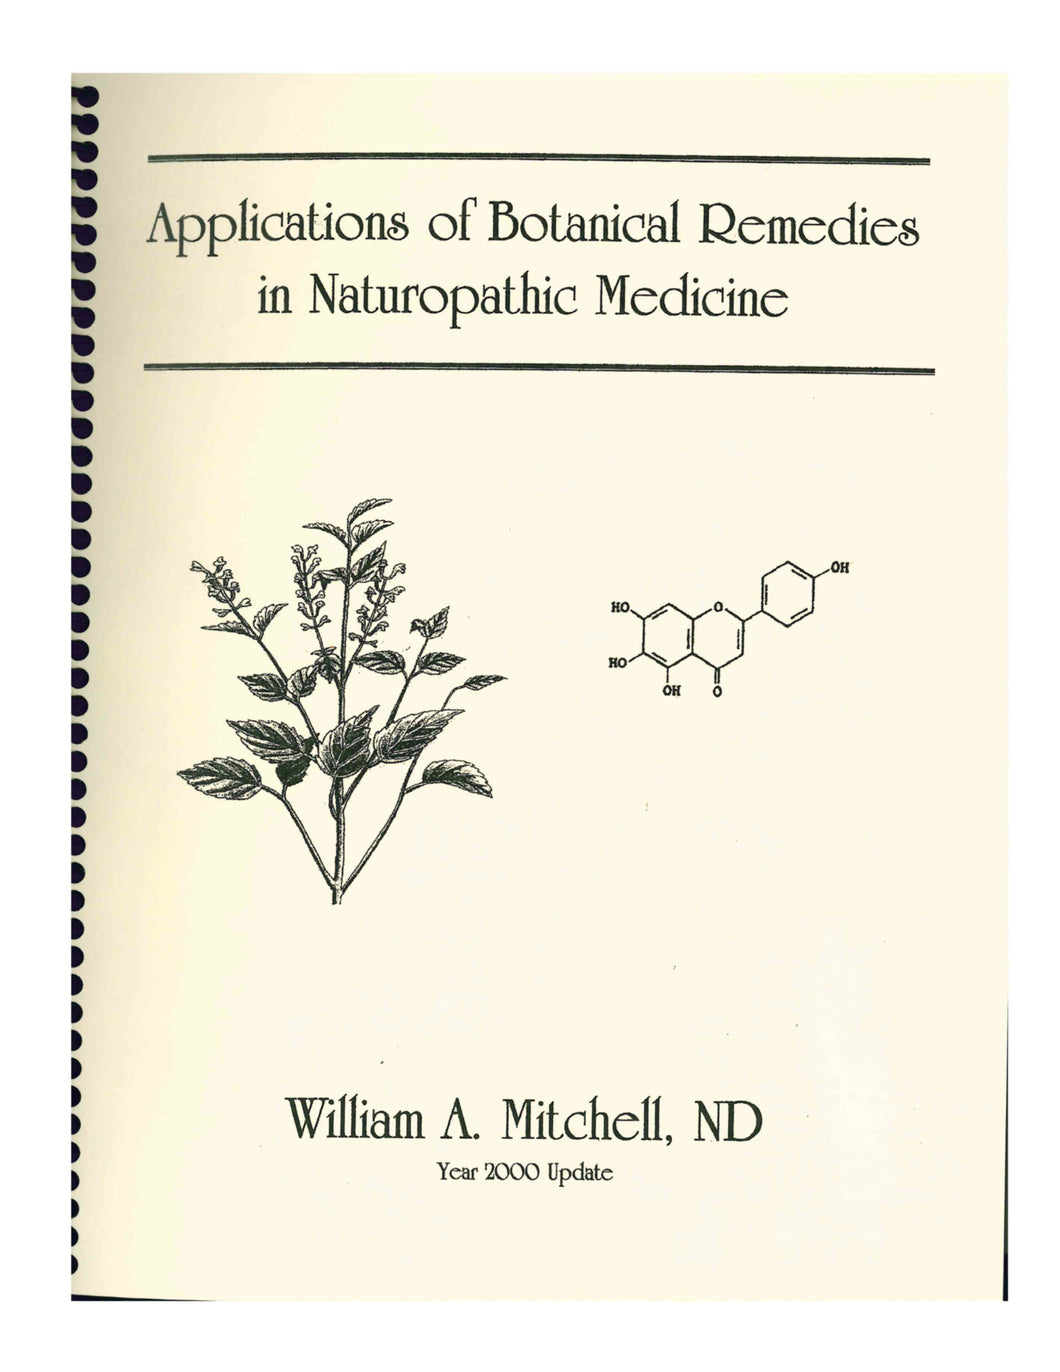 Applications of Botanical Remedies in Naturopathic Medicine by William Mitchell, ND